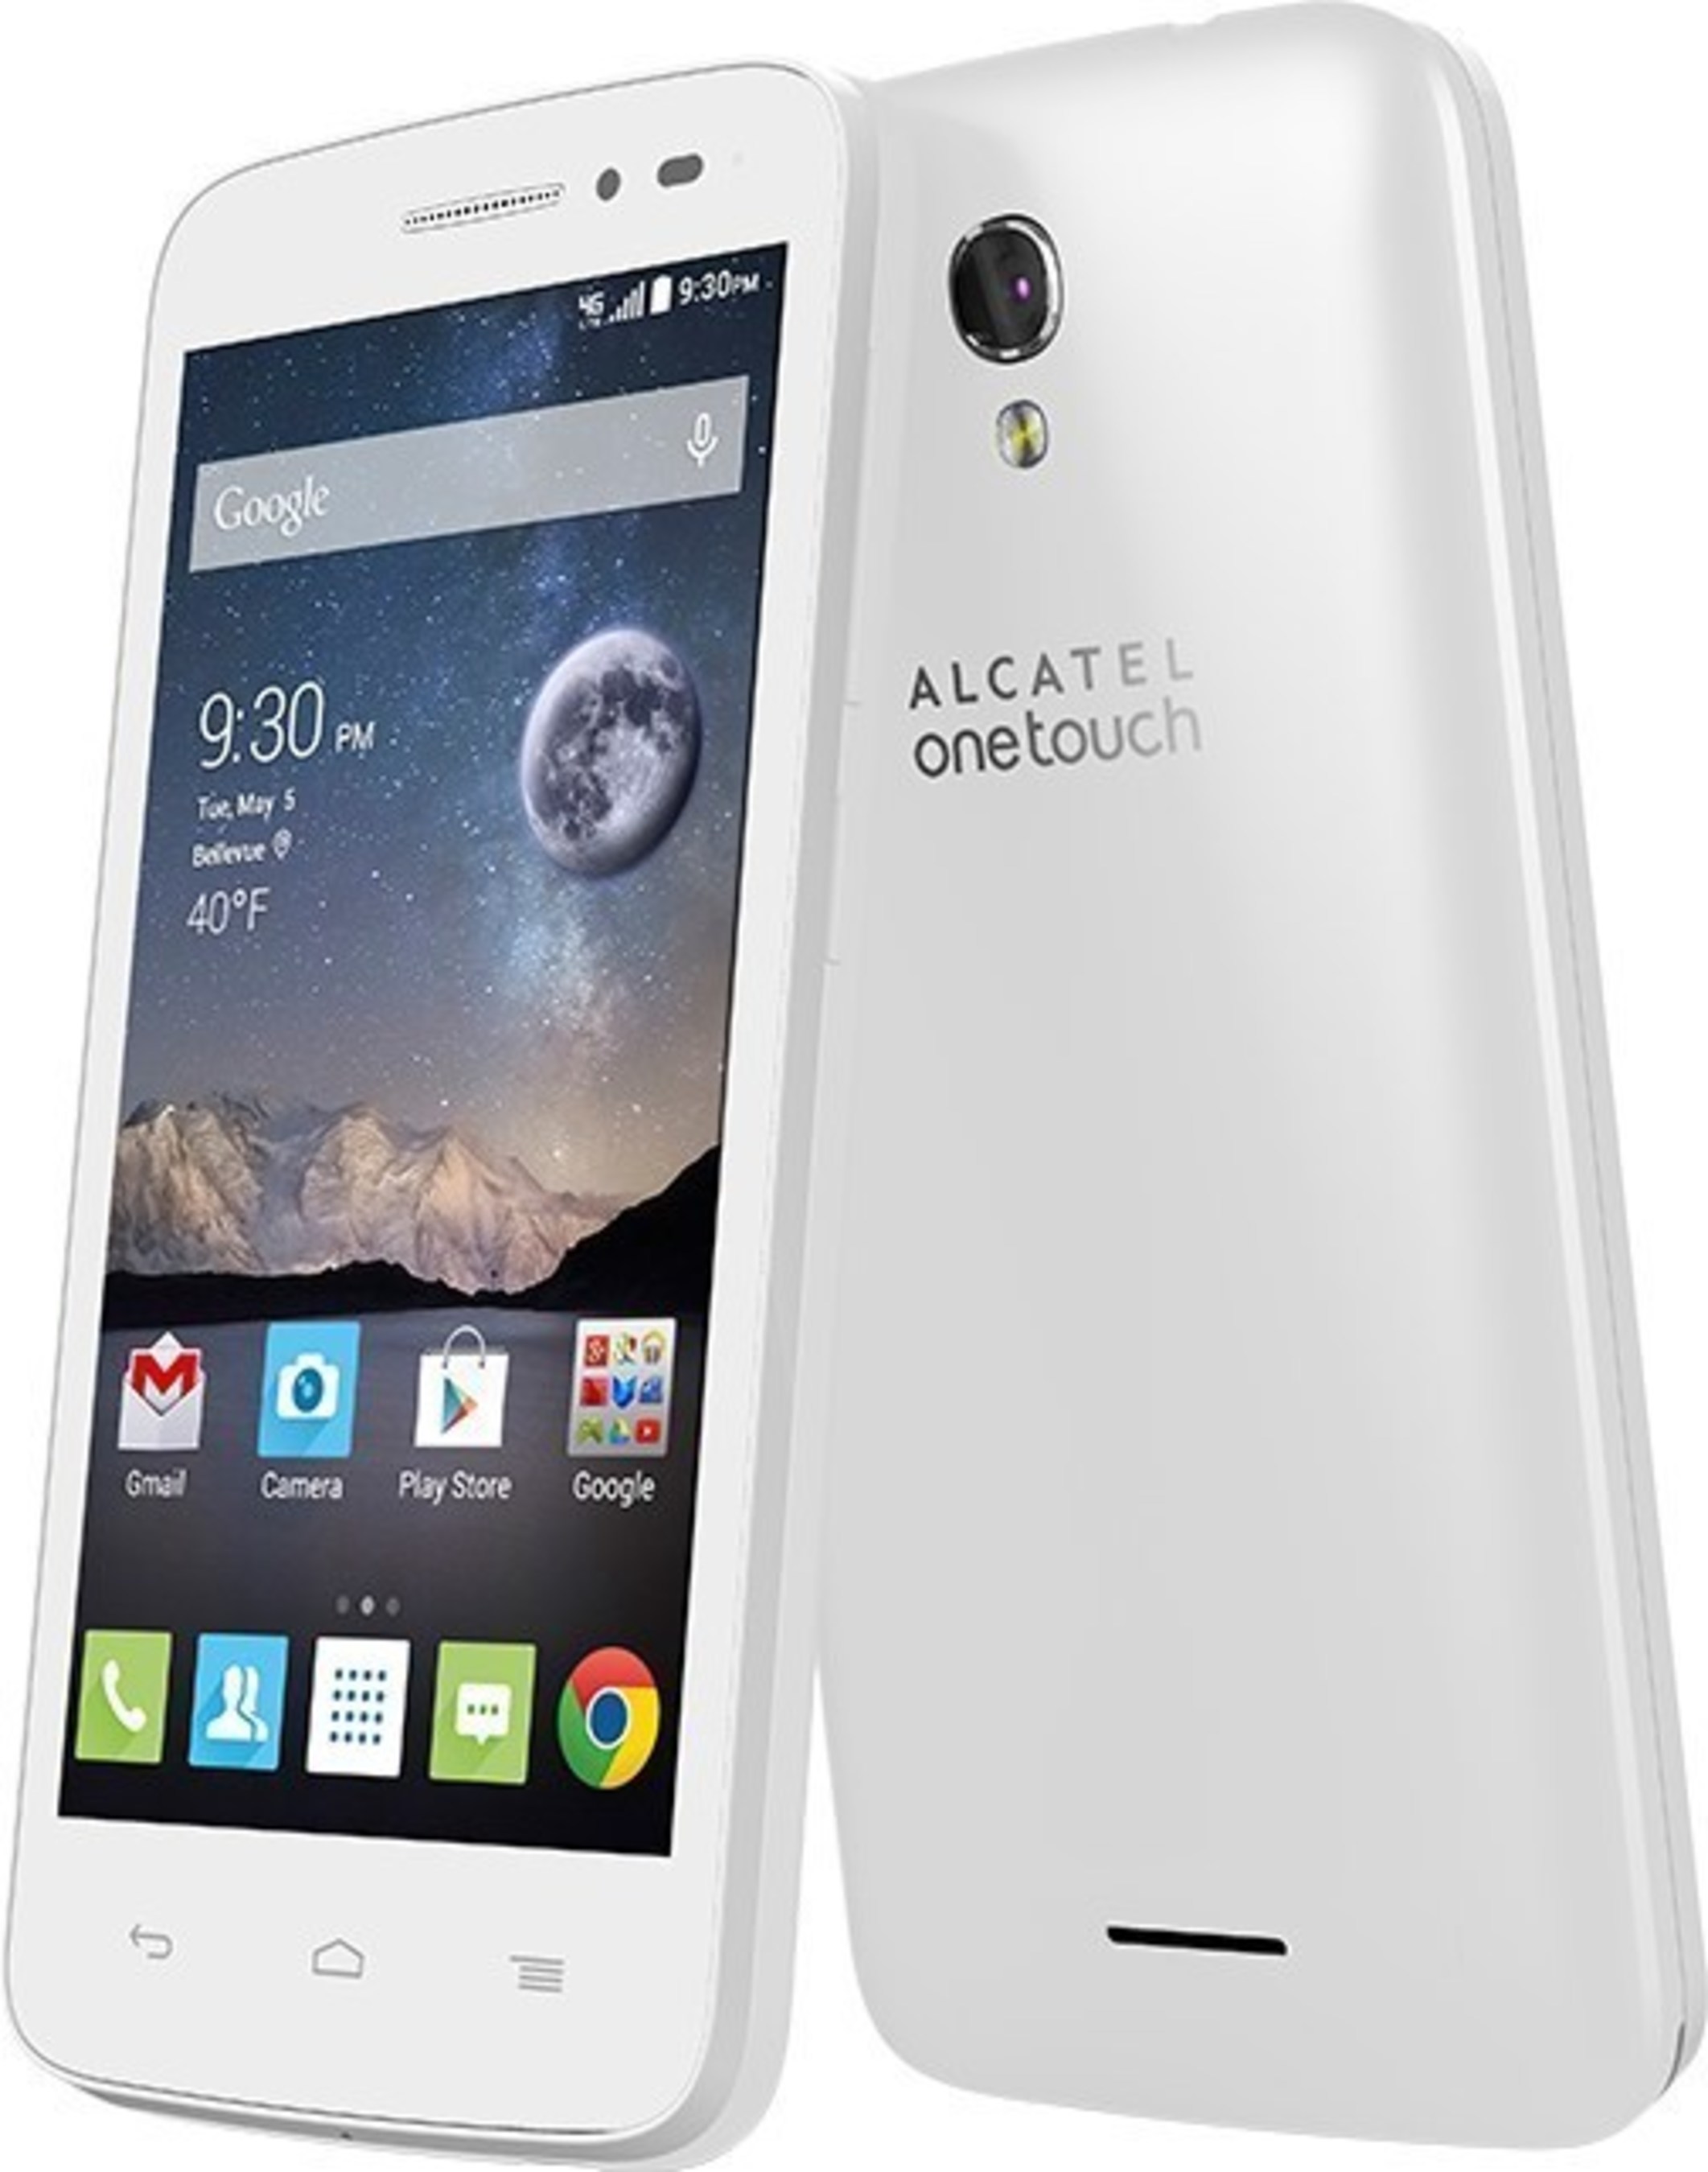 The ALCATEL ONETOUCH POP Astro for T-Mobile.